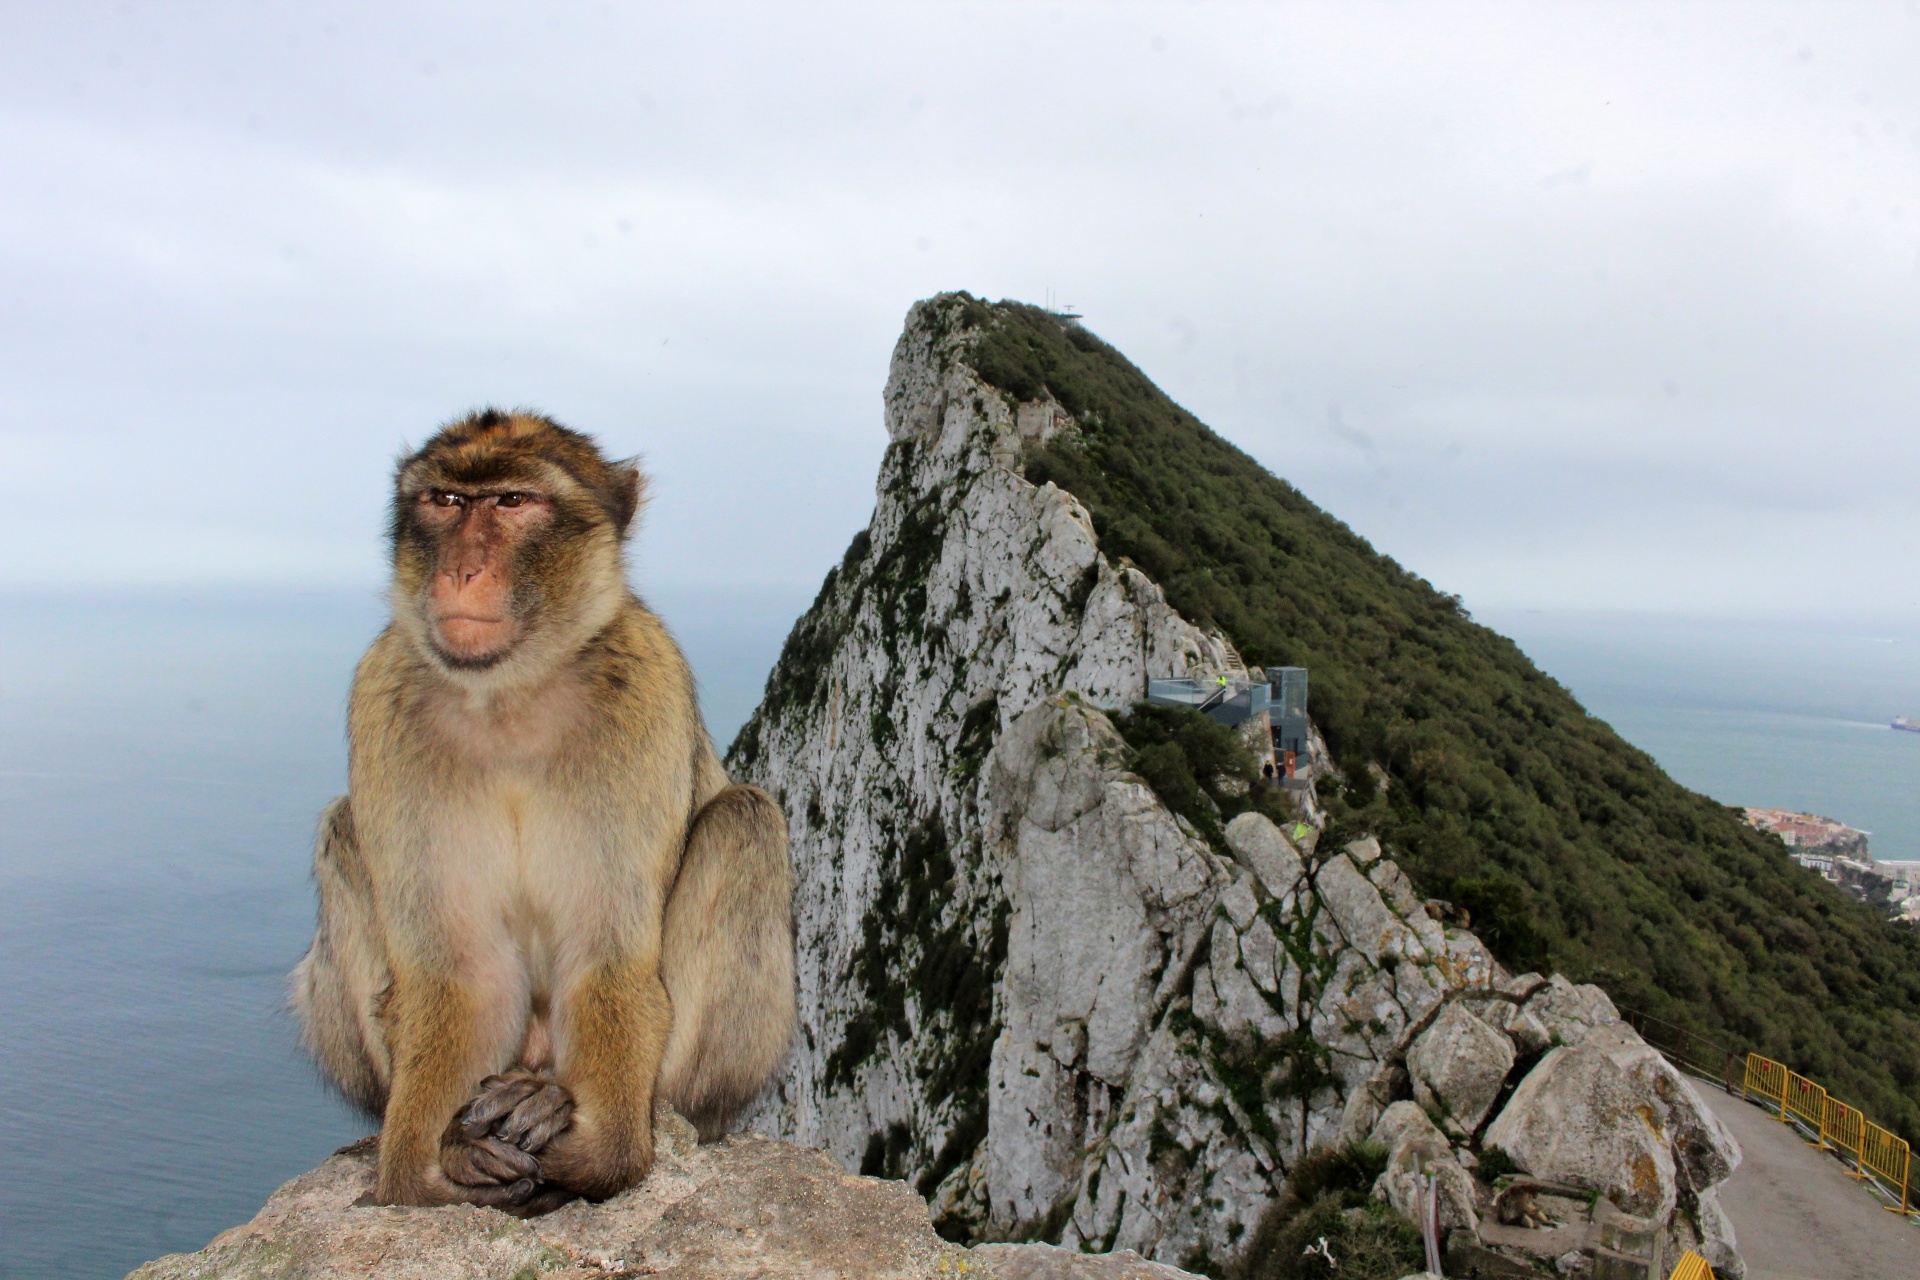 A Barbary ape on the Rock of Gibraltar